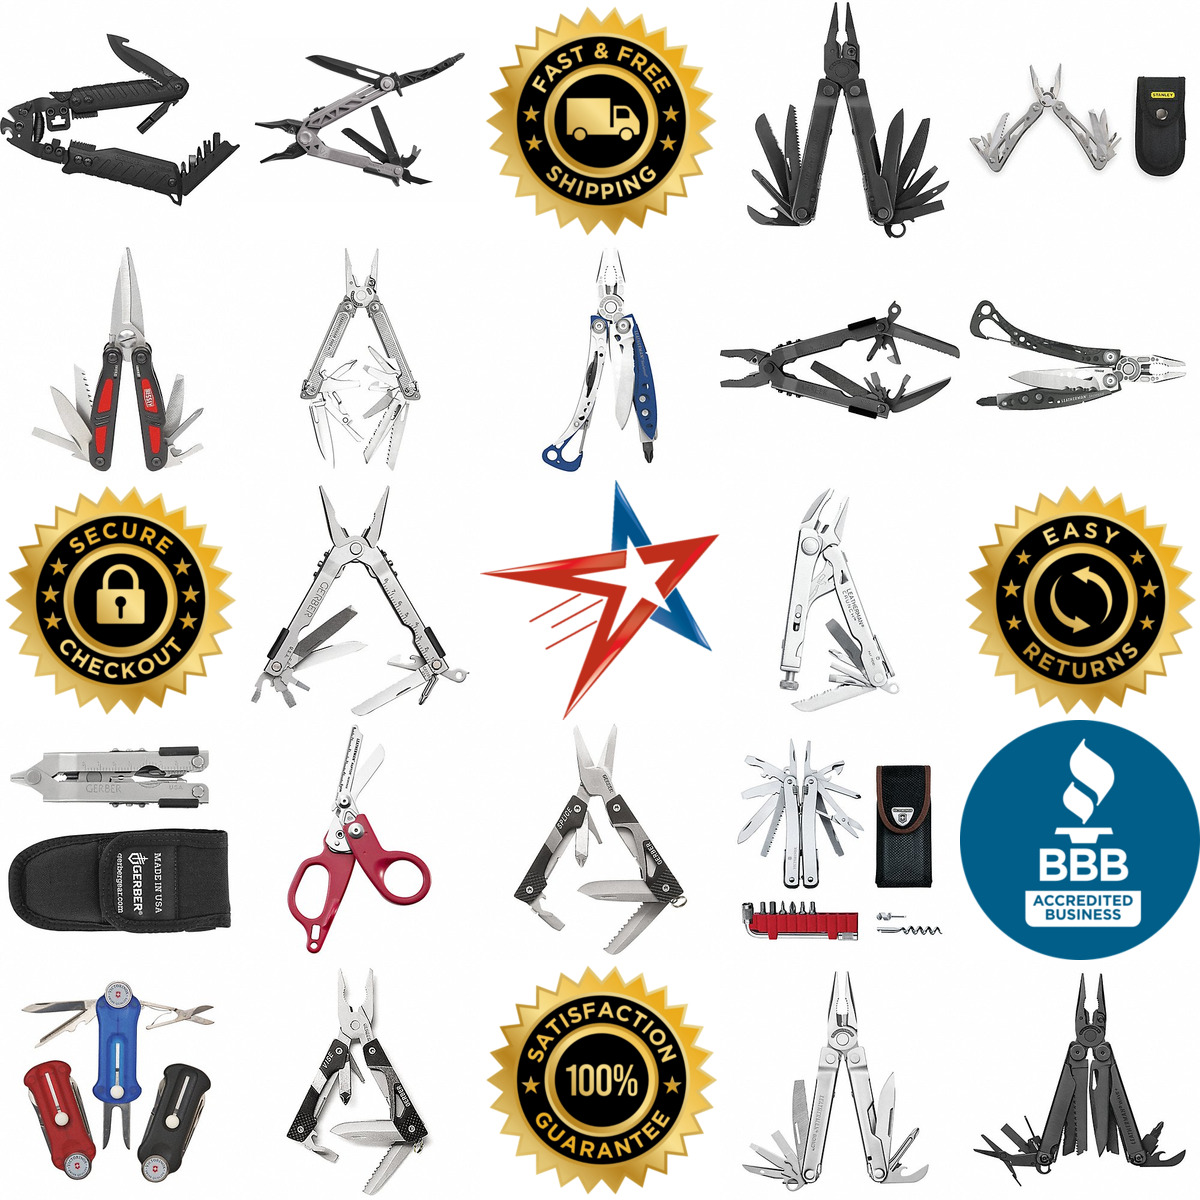 A selection of Multi Tool Pliers products on GoVets